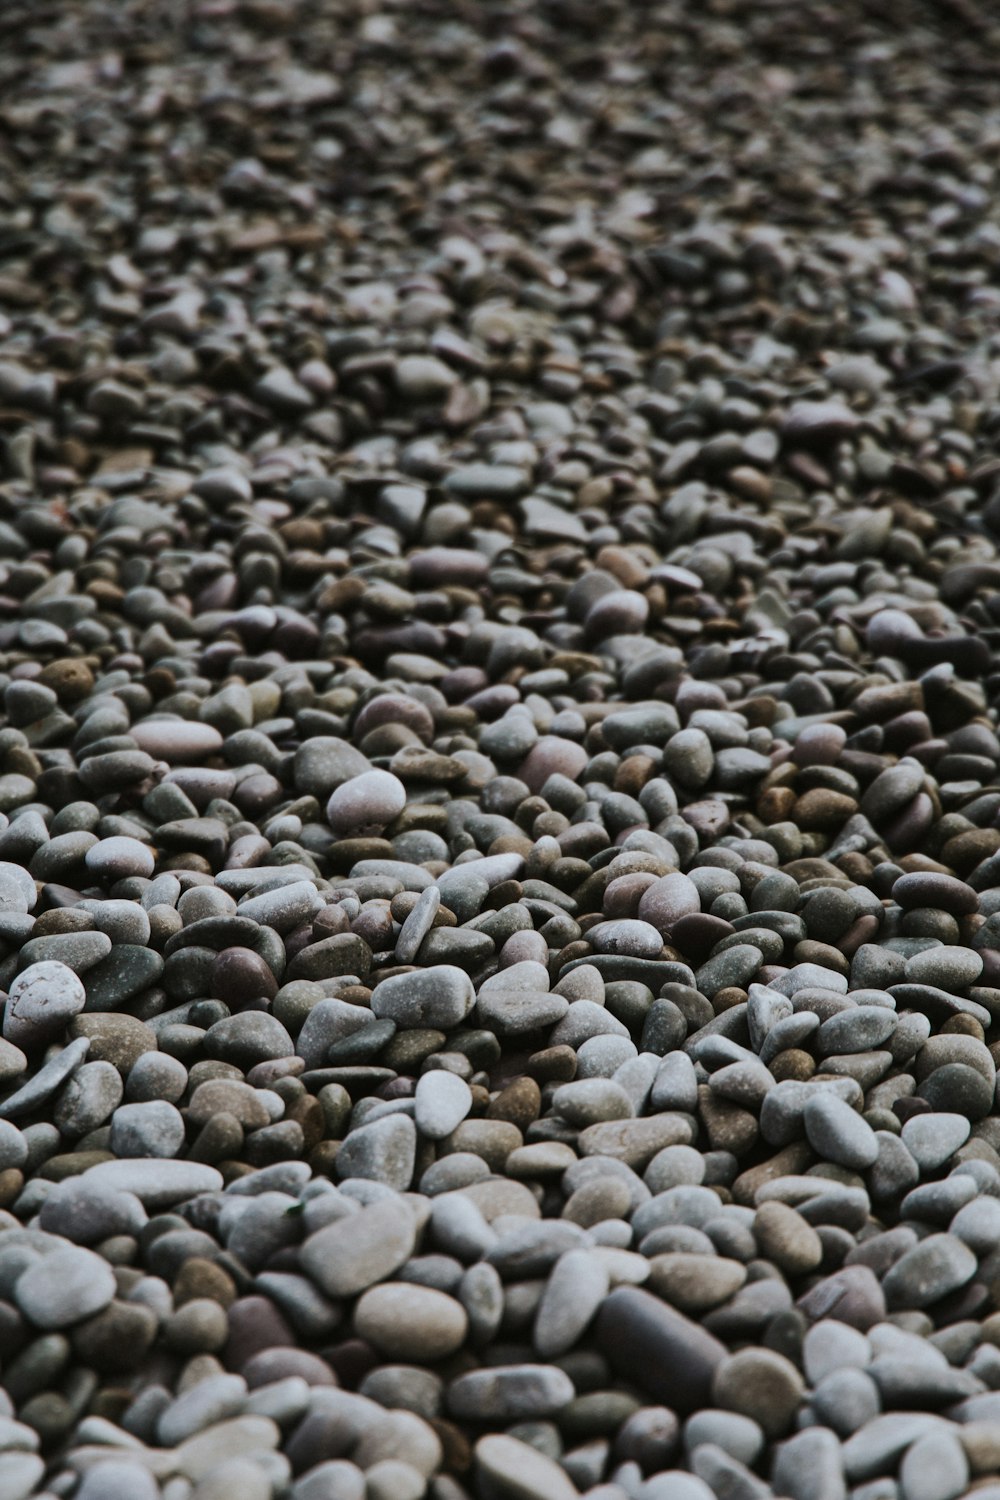 brown and gray stones on ground